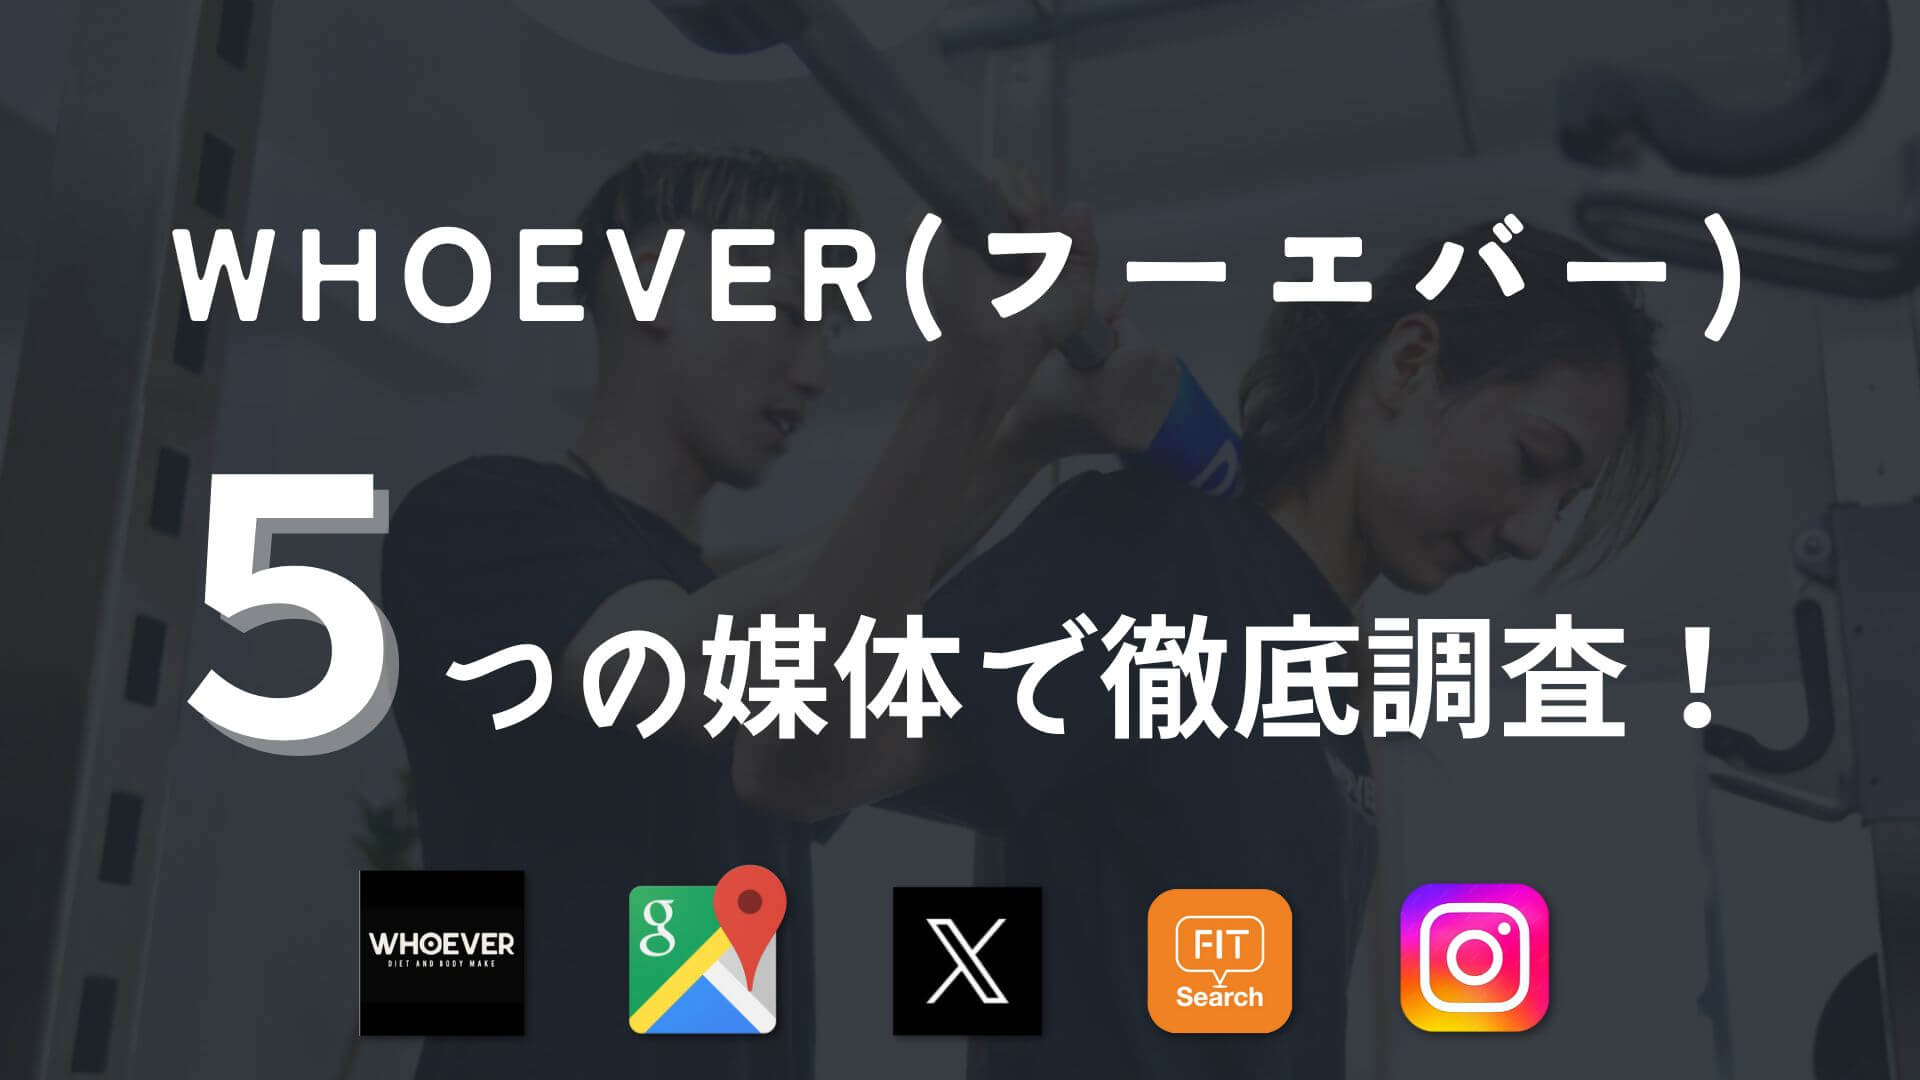 WHOEVERの口コミや評判を徹底調査